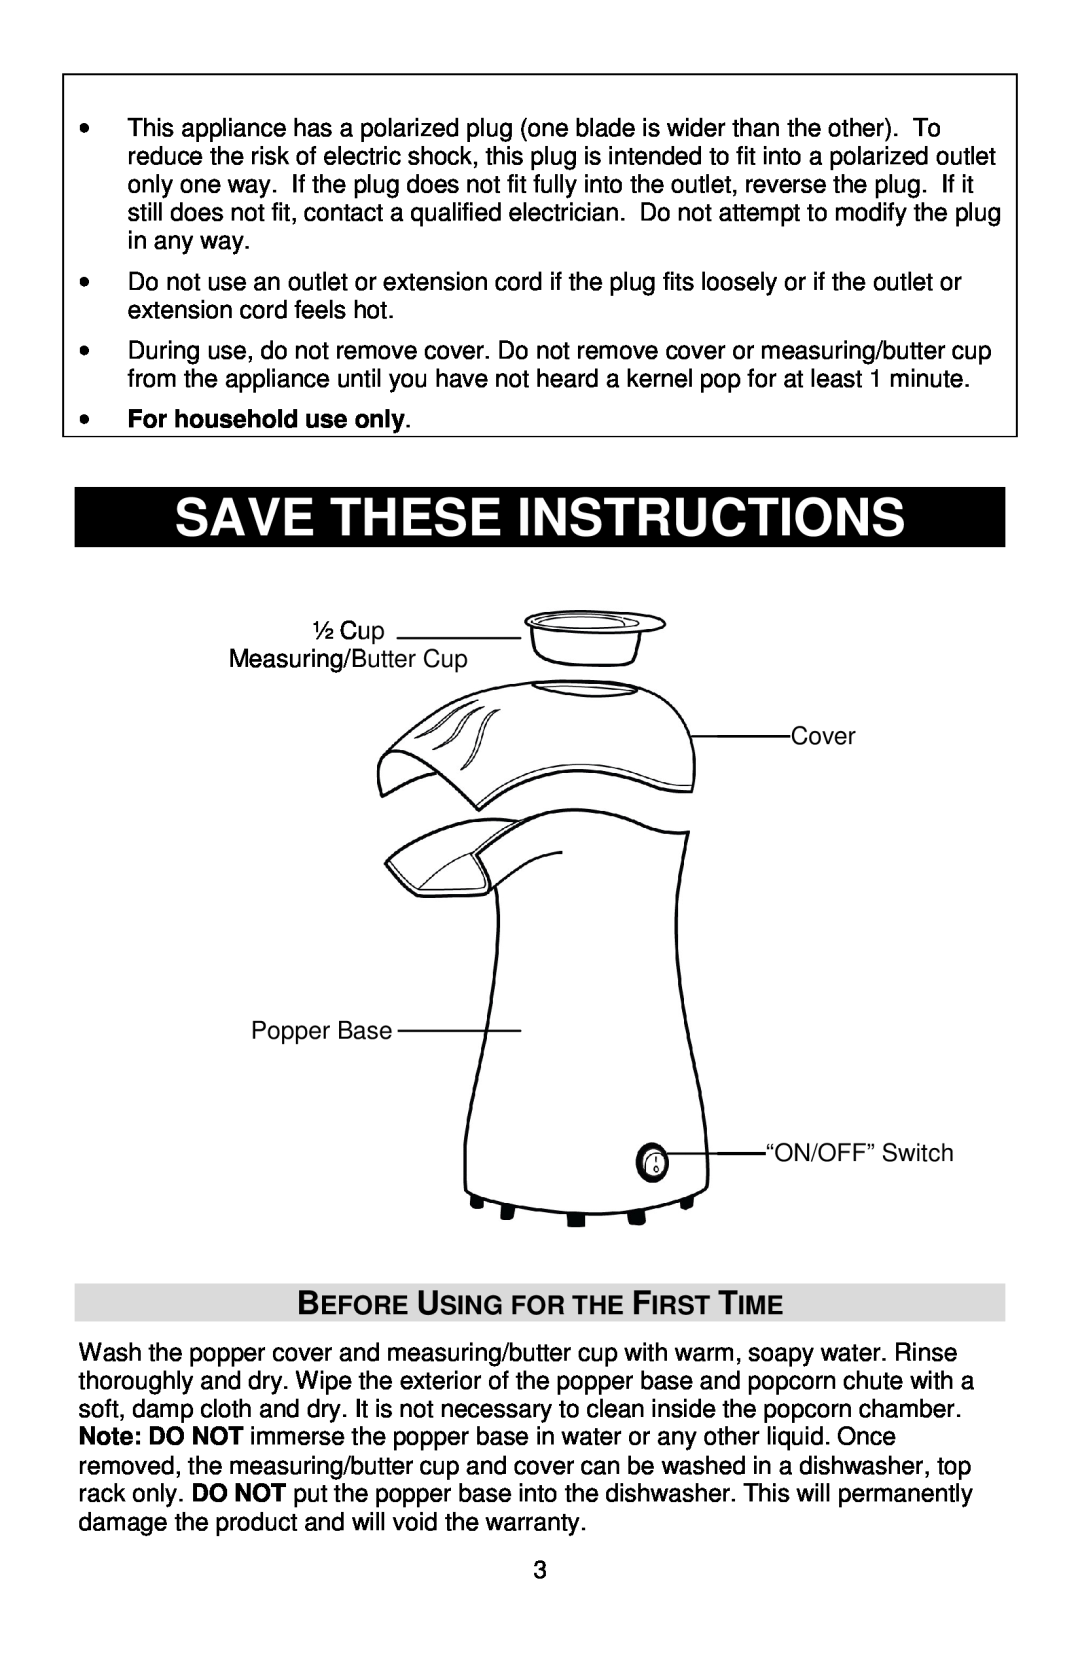 West Bend 82416, L5792B instruction manual Save These Instructions, Before Using For The First Time, For household use only 